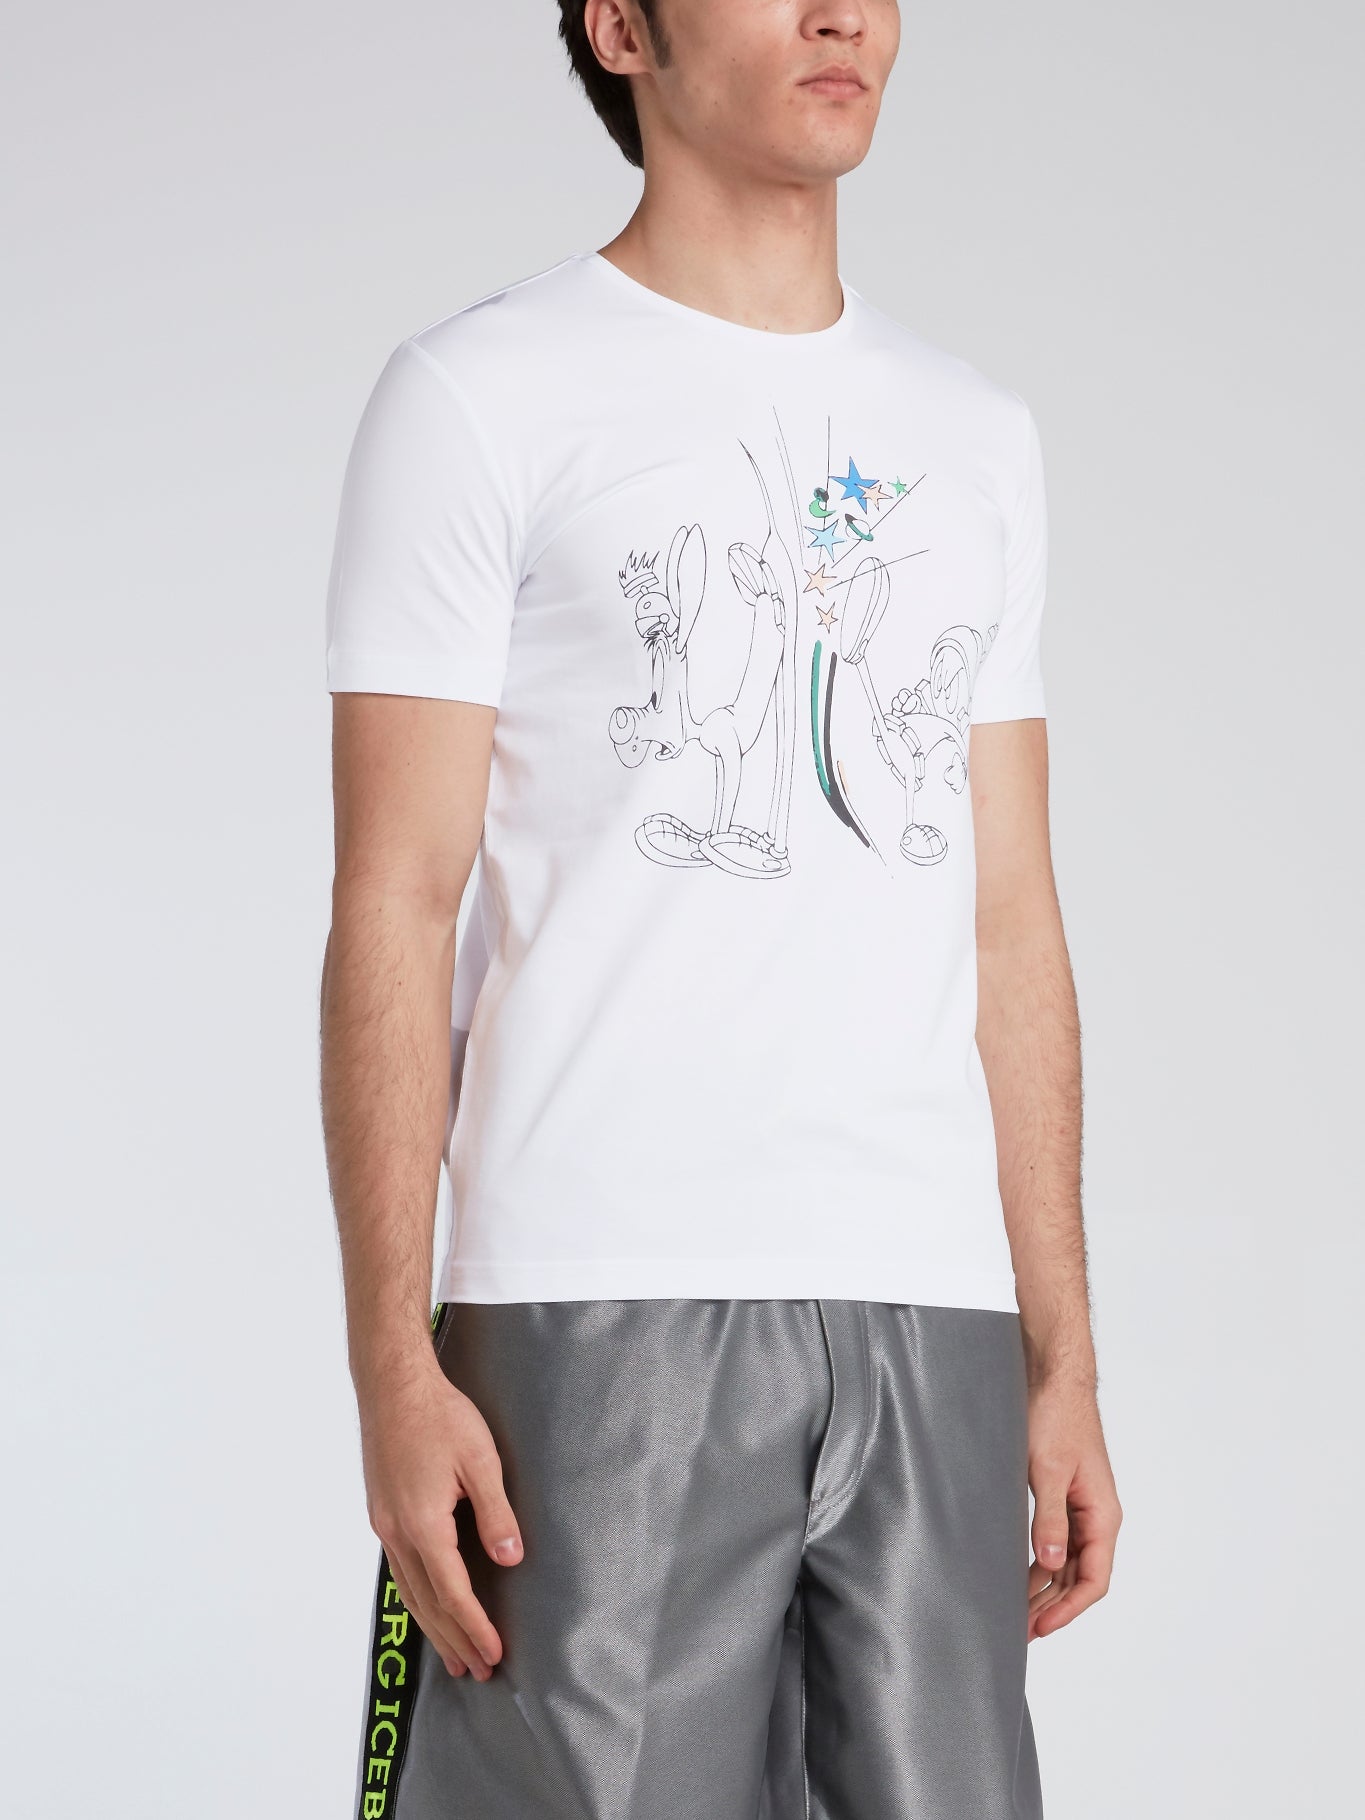 Marvin the Martian White Cotton T-Shirt